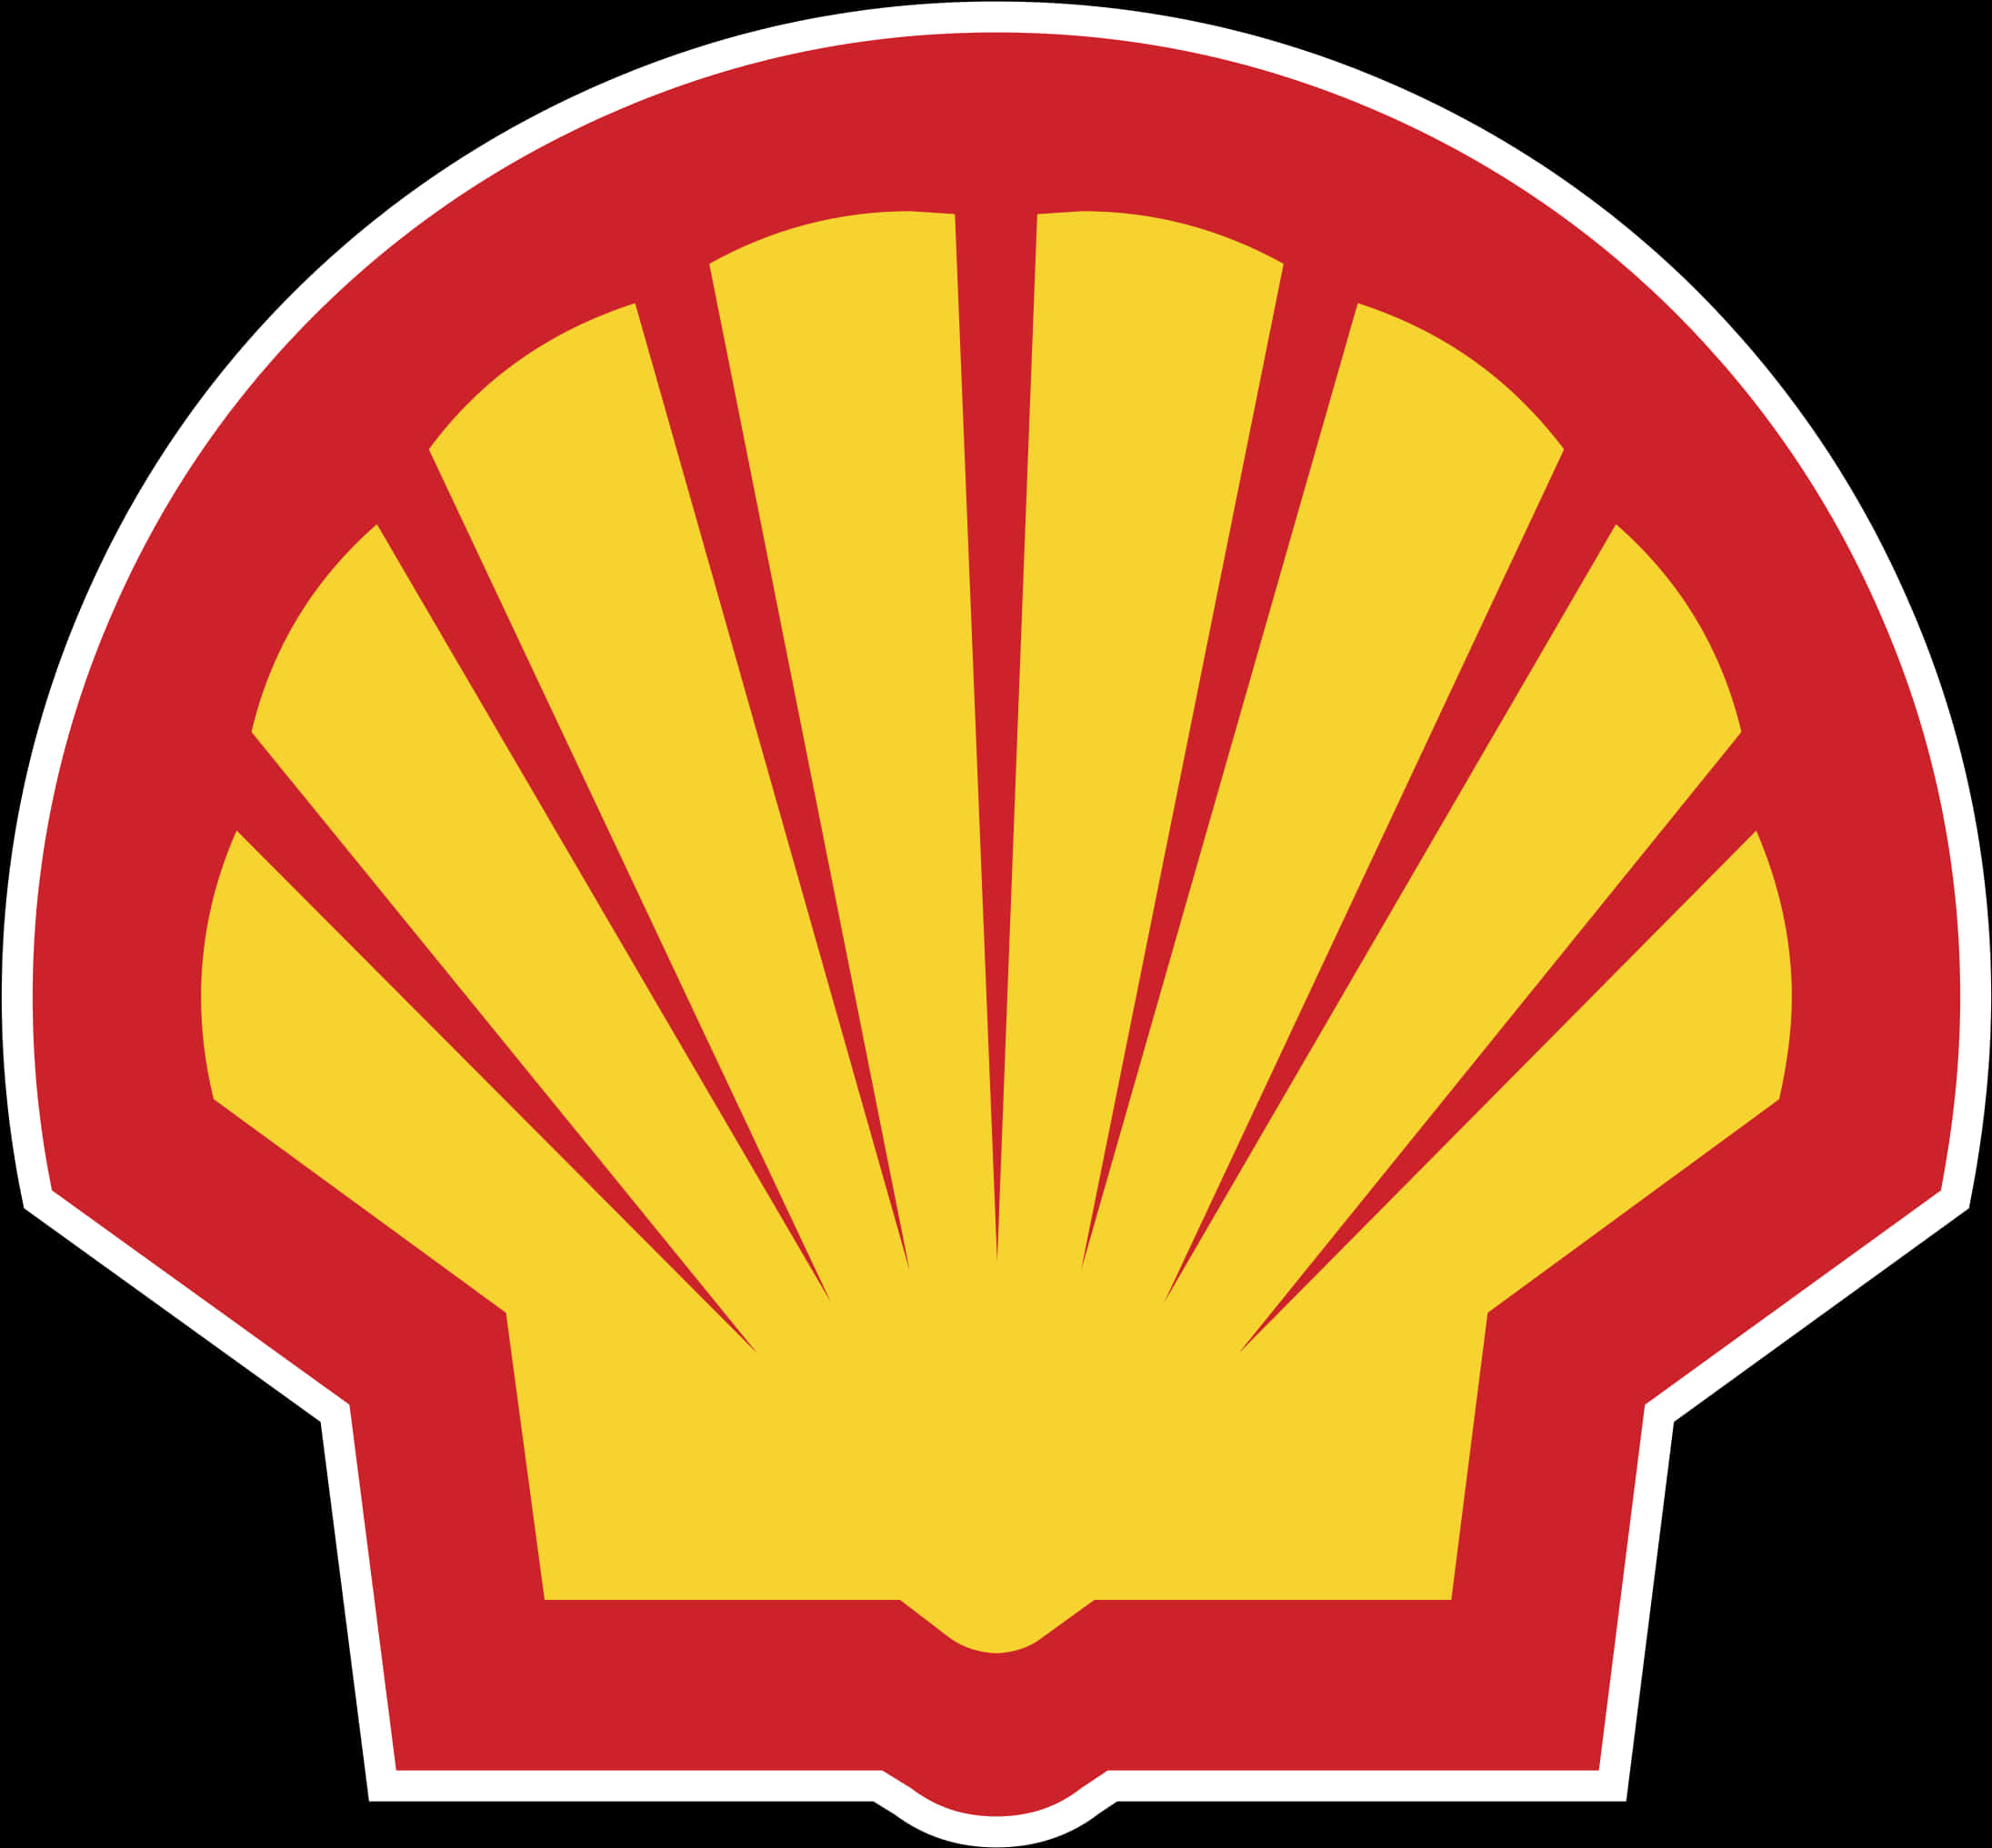 Shell Logo Red Yellow PNG